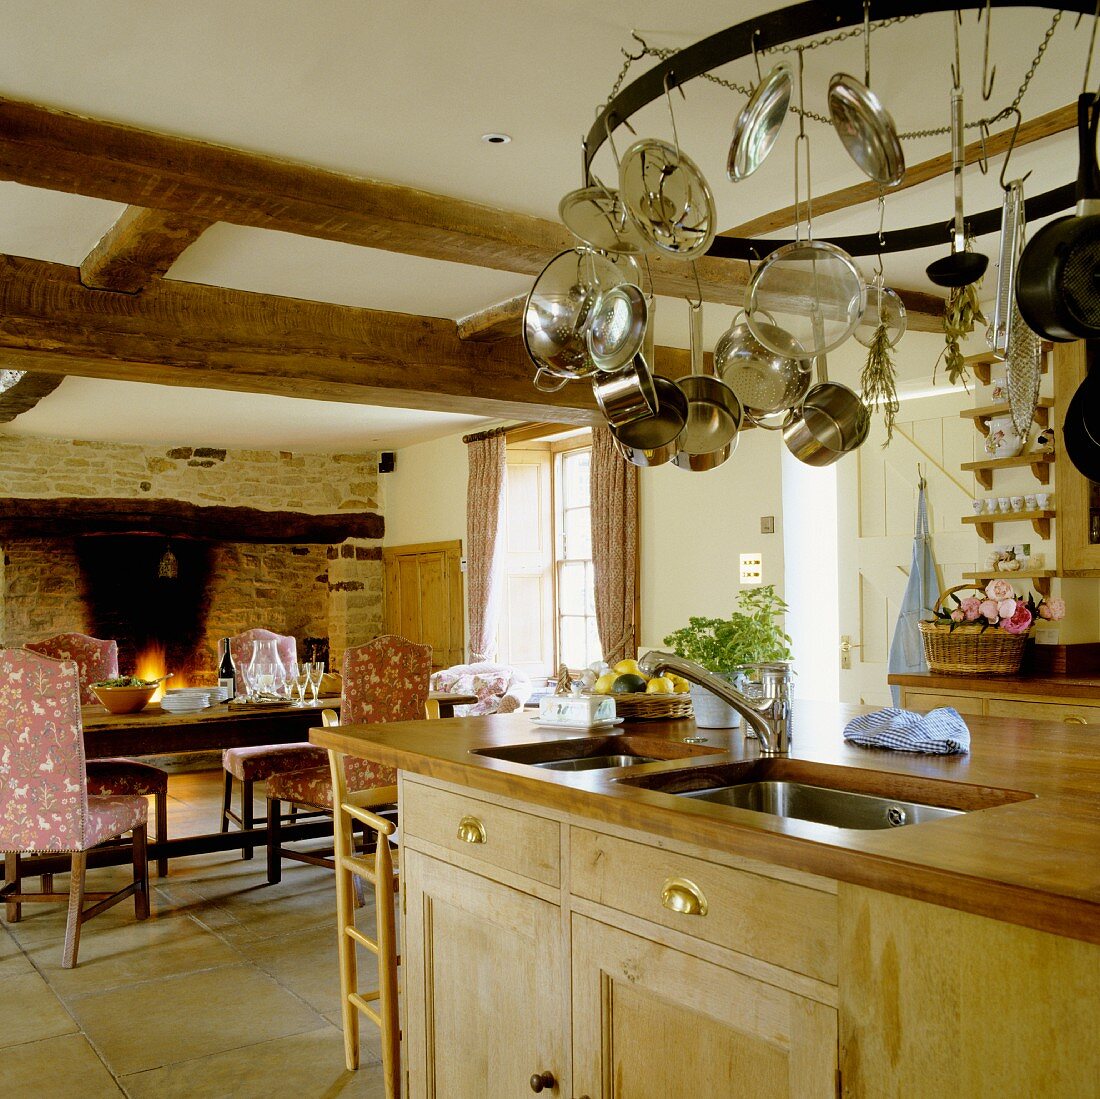 An open-plan kitchen in a country house with a dining area in front of a fireplace